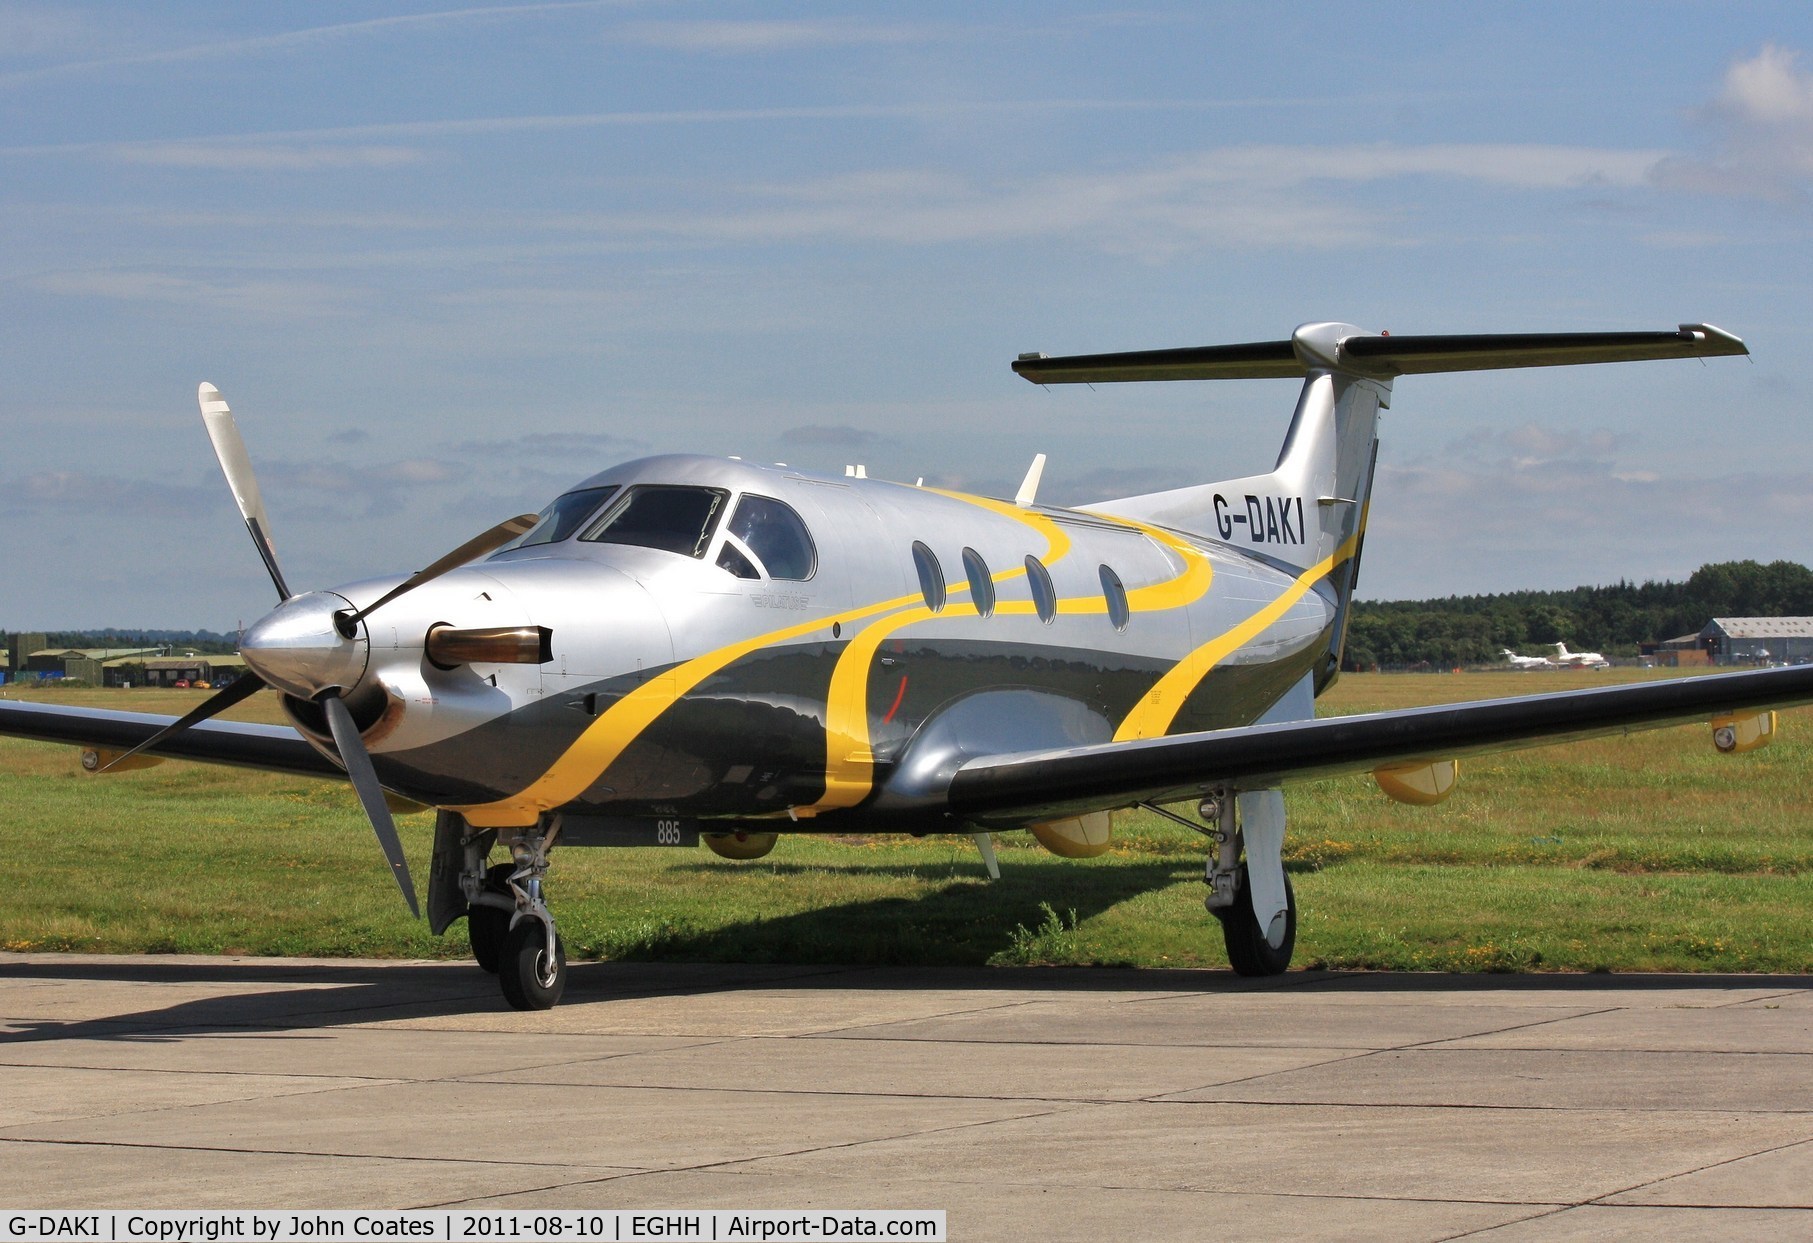 G-DAKI, 2008 Pilatus PC-12/47 C/N 885, After the yellow ribbons were tied.